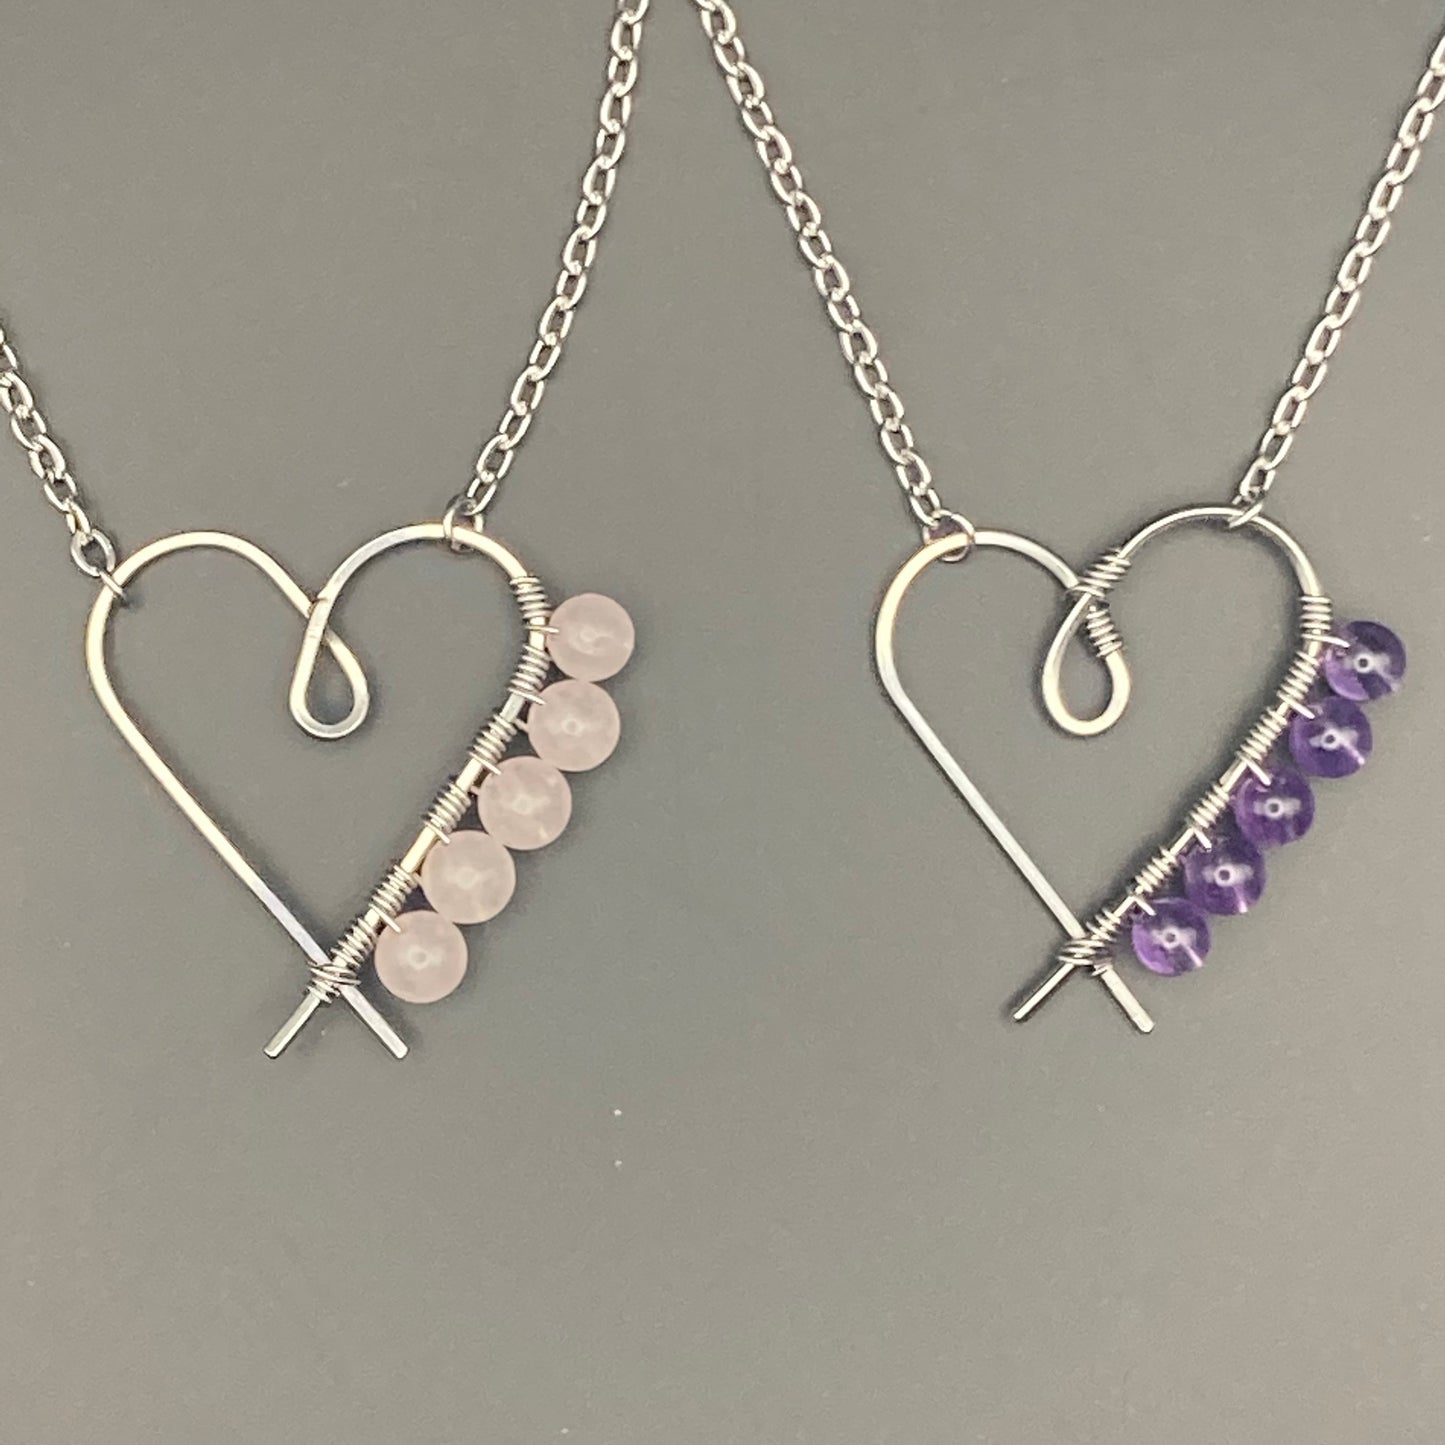 5 Stone Heart Necklace